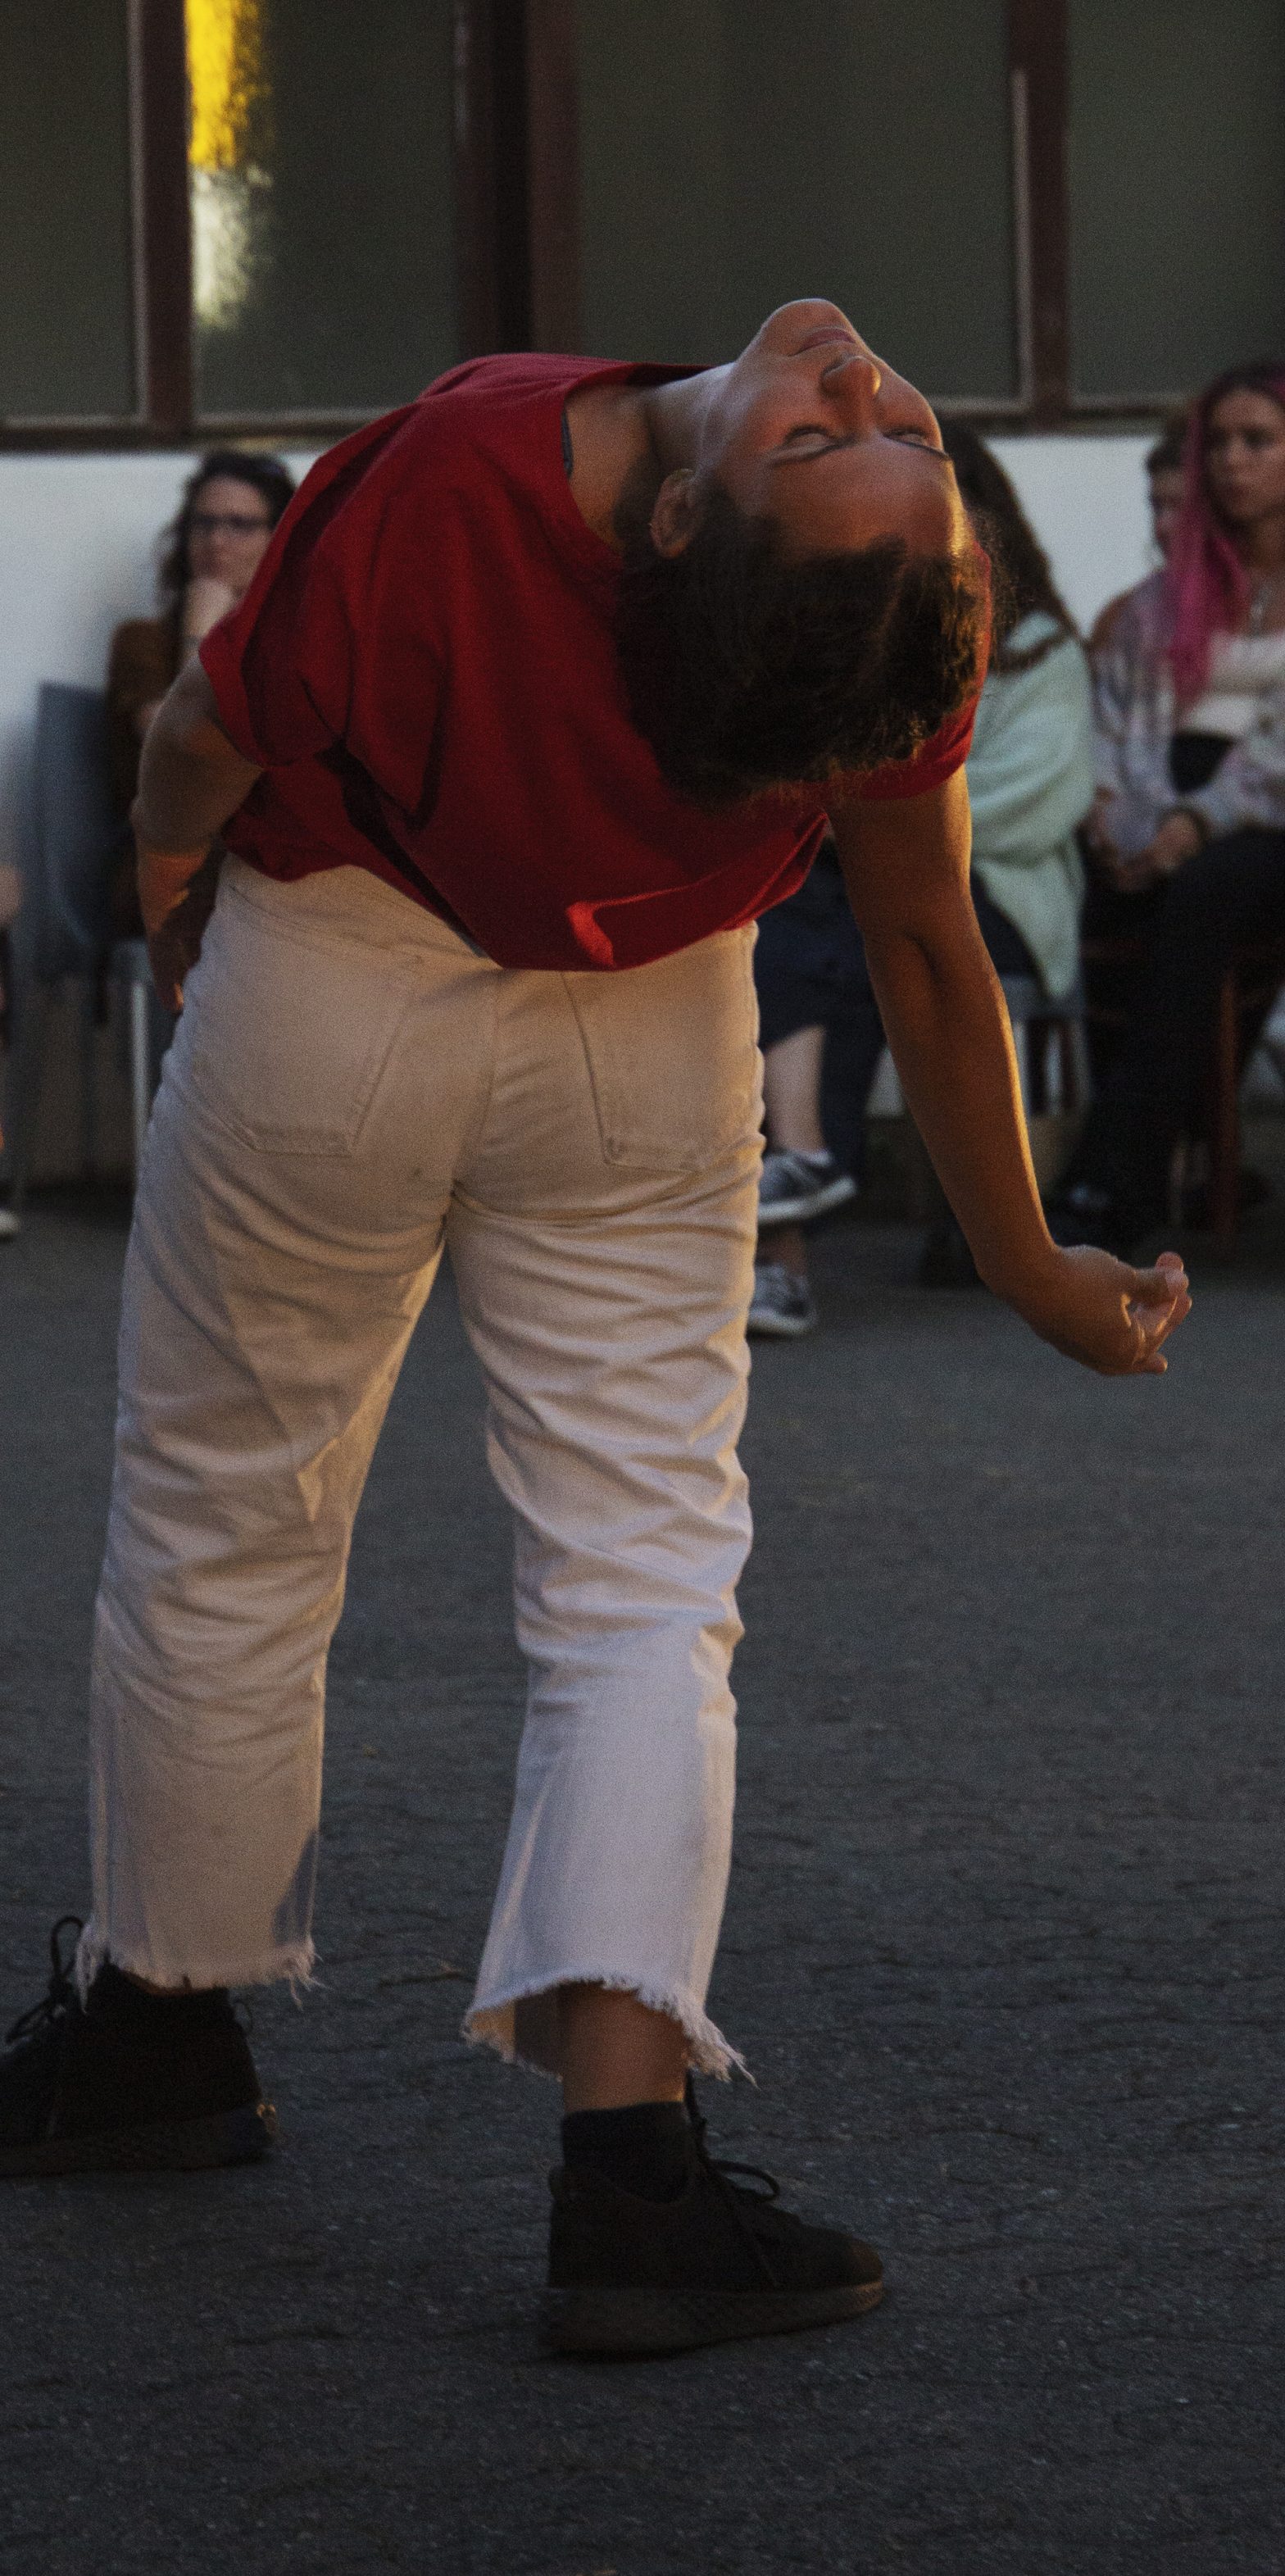 A woman is dancing. She is wearing white trousers and a red top and leans backwards.